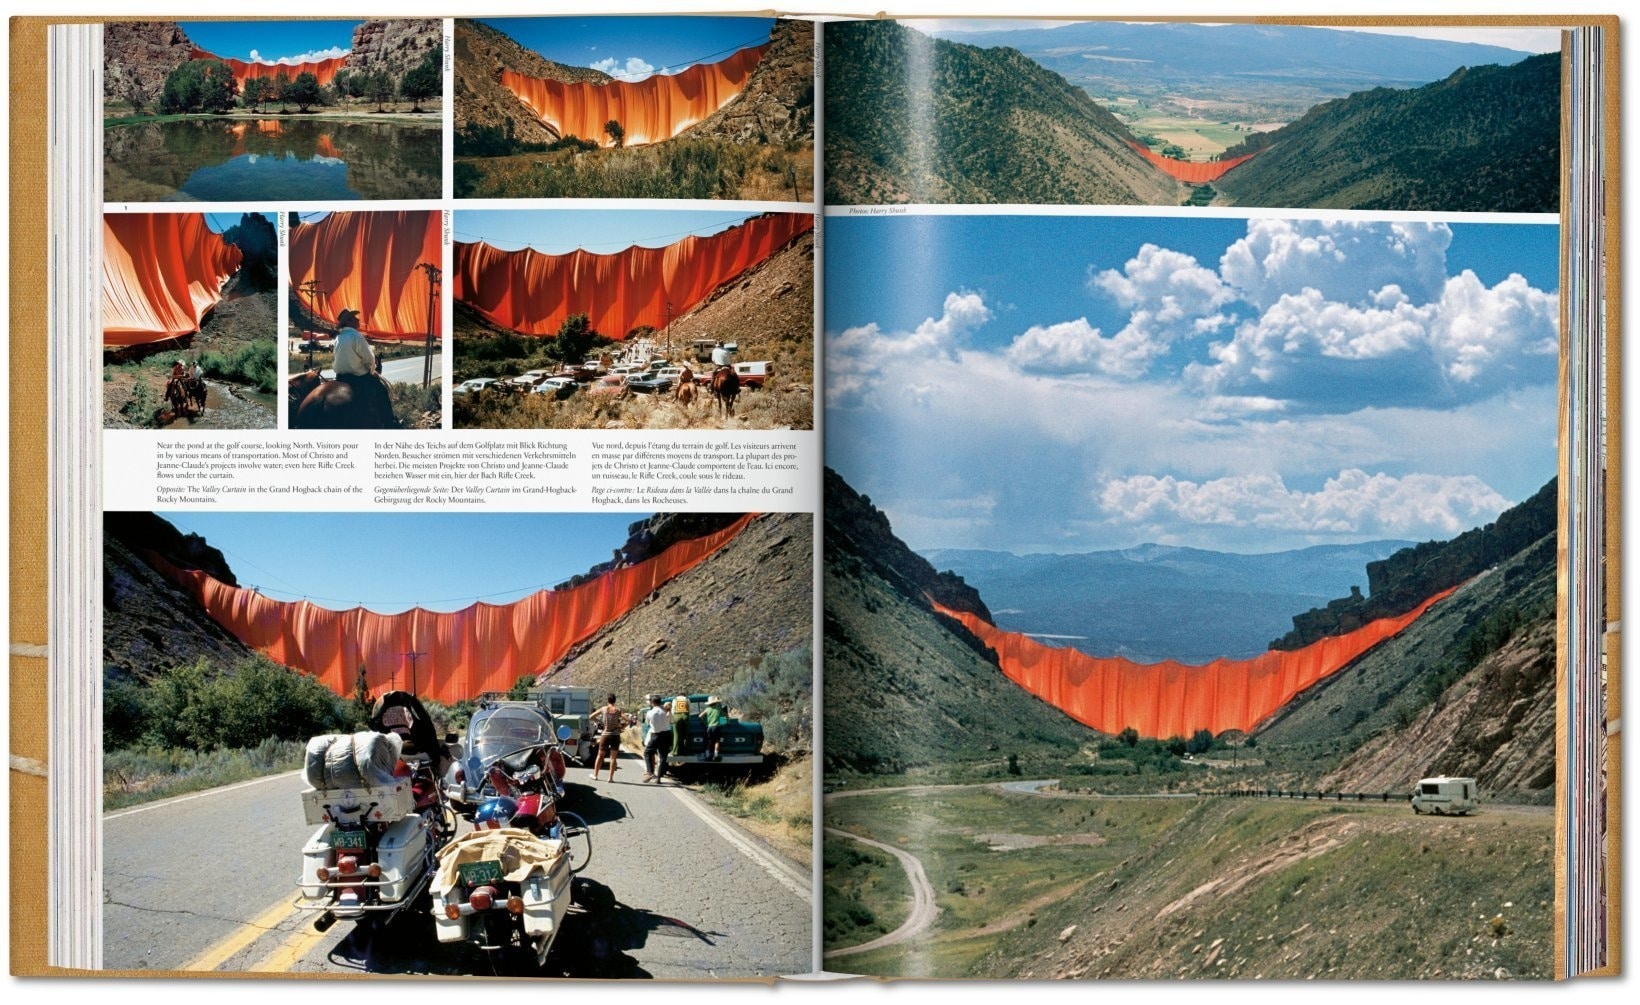 christo-and-jeanne-claude-updated-edition-7